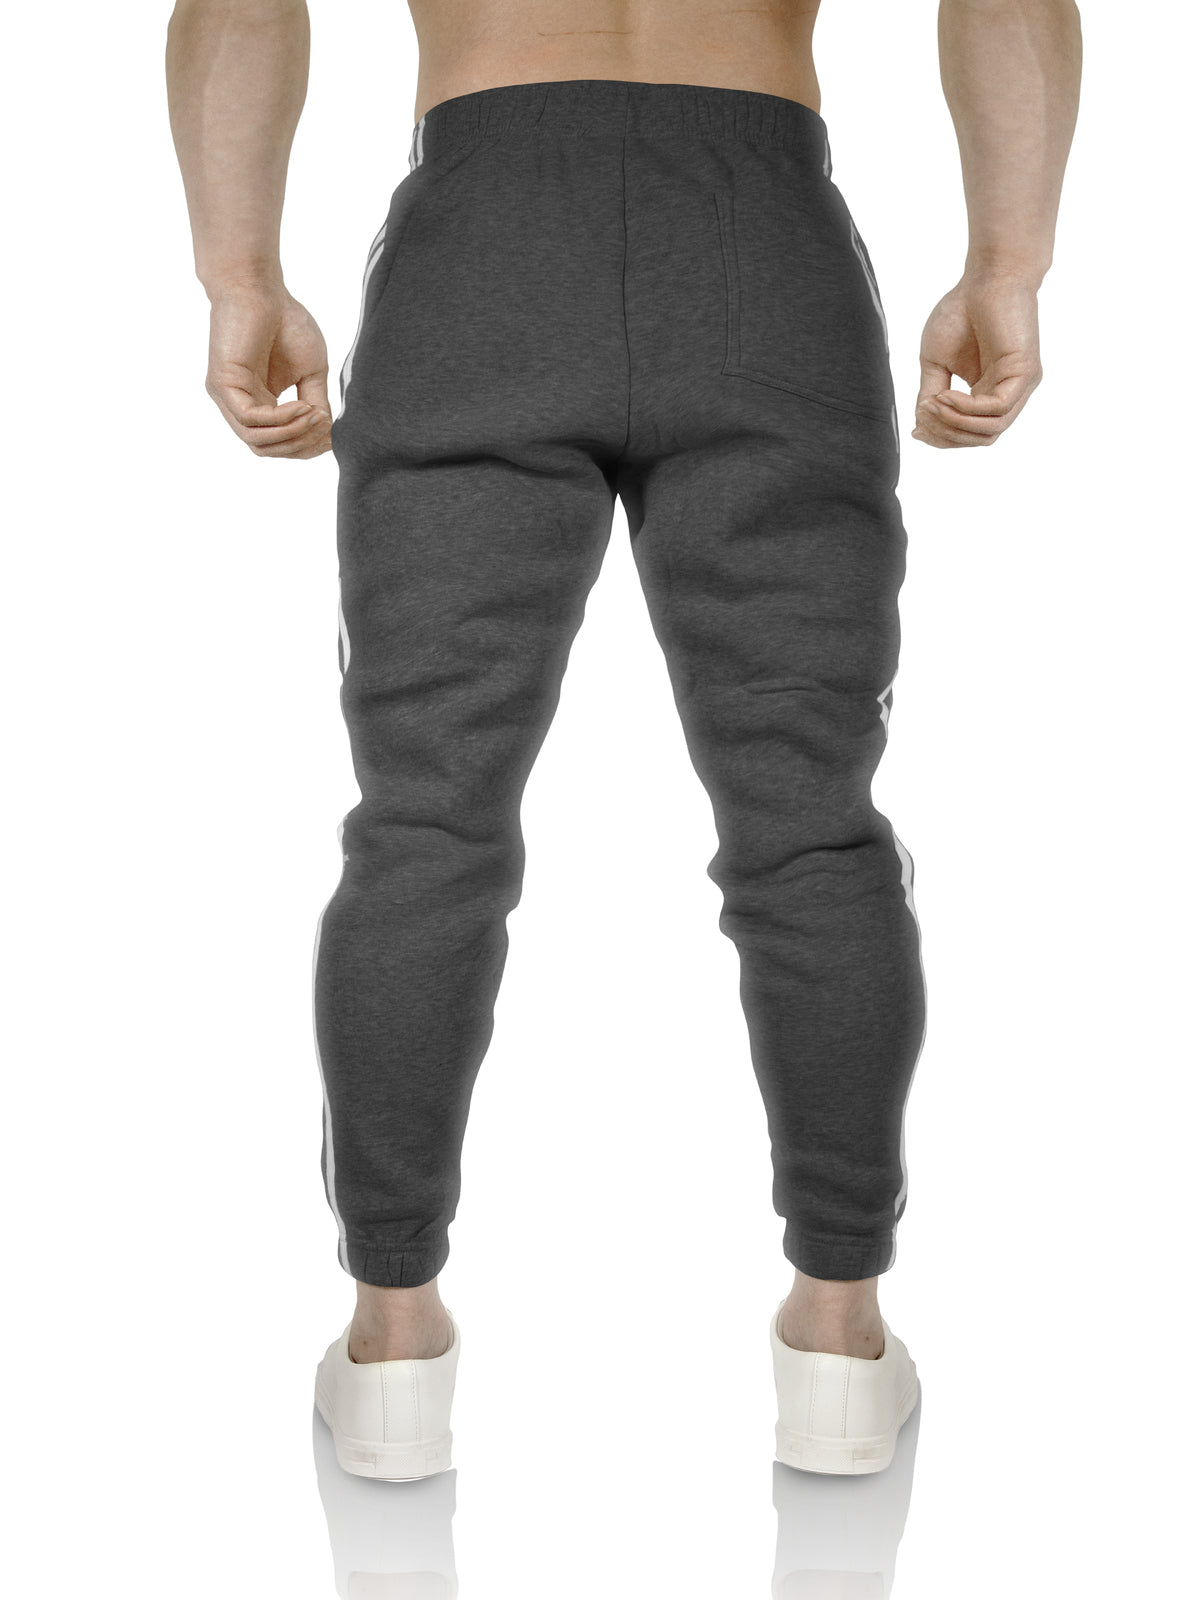 Mens Fleece Skinny Track Pants Jogger Gym Casual Sweat Trackies Warm Trousers - Charcoal Marle/White Stripe - S